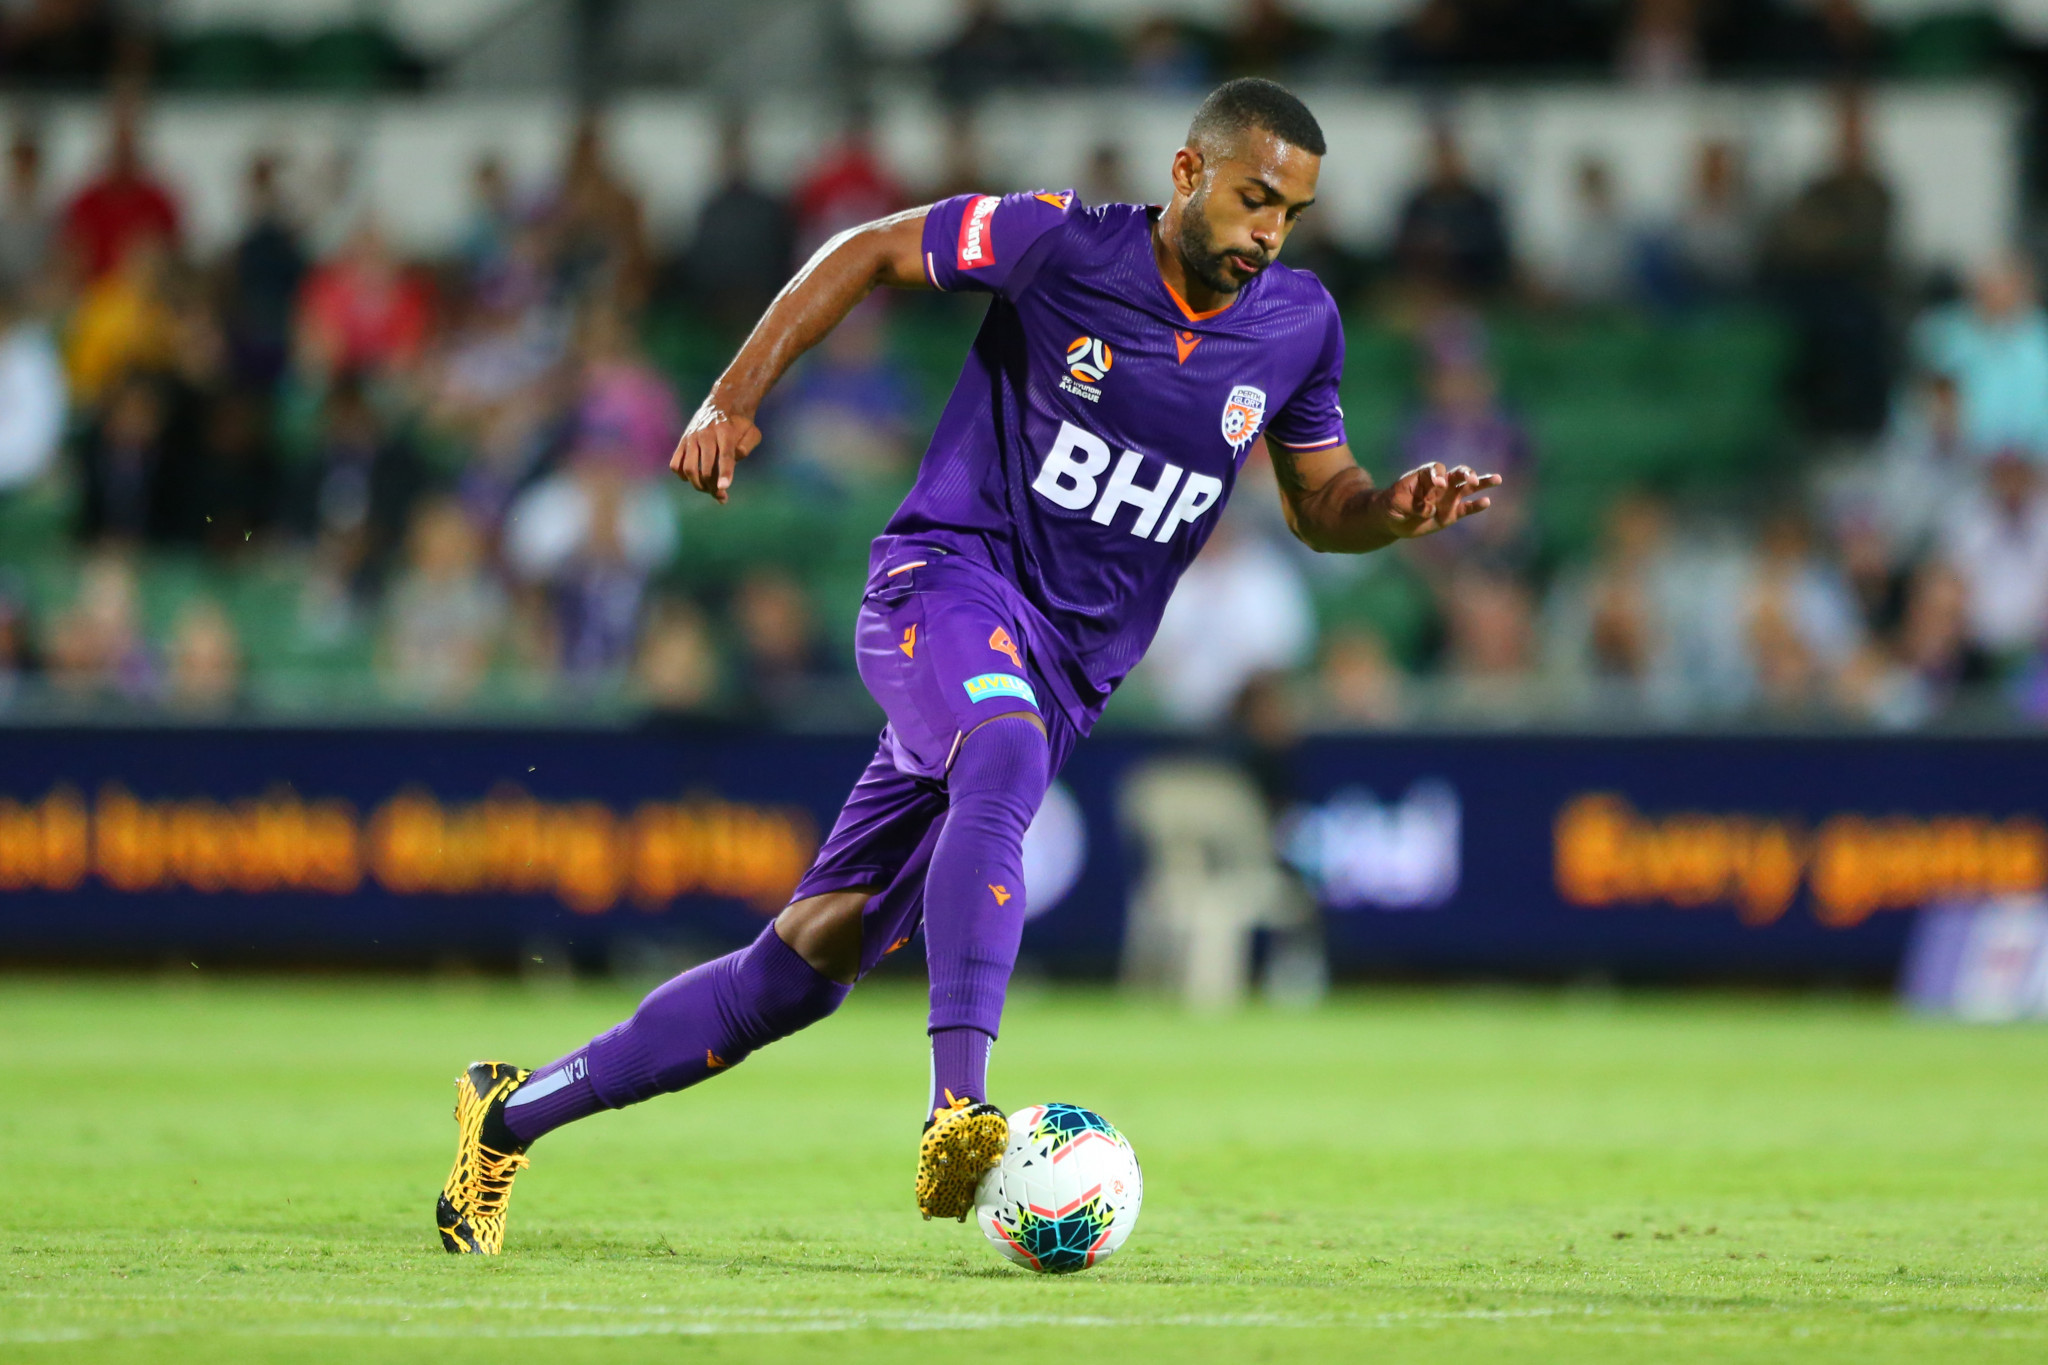 Perth Glory are among the teams whose AFC Champions League campaign could be impacted by the coronavirus outbreak ©Getty Images